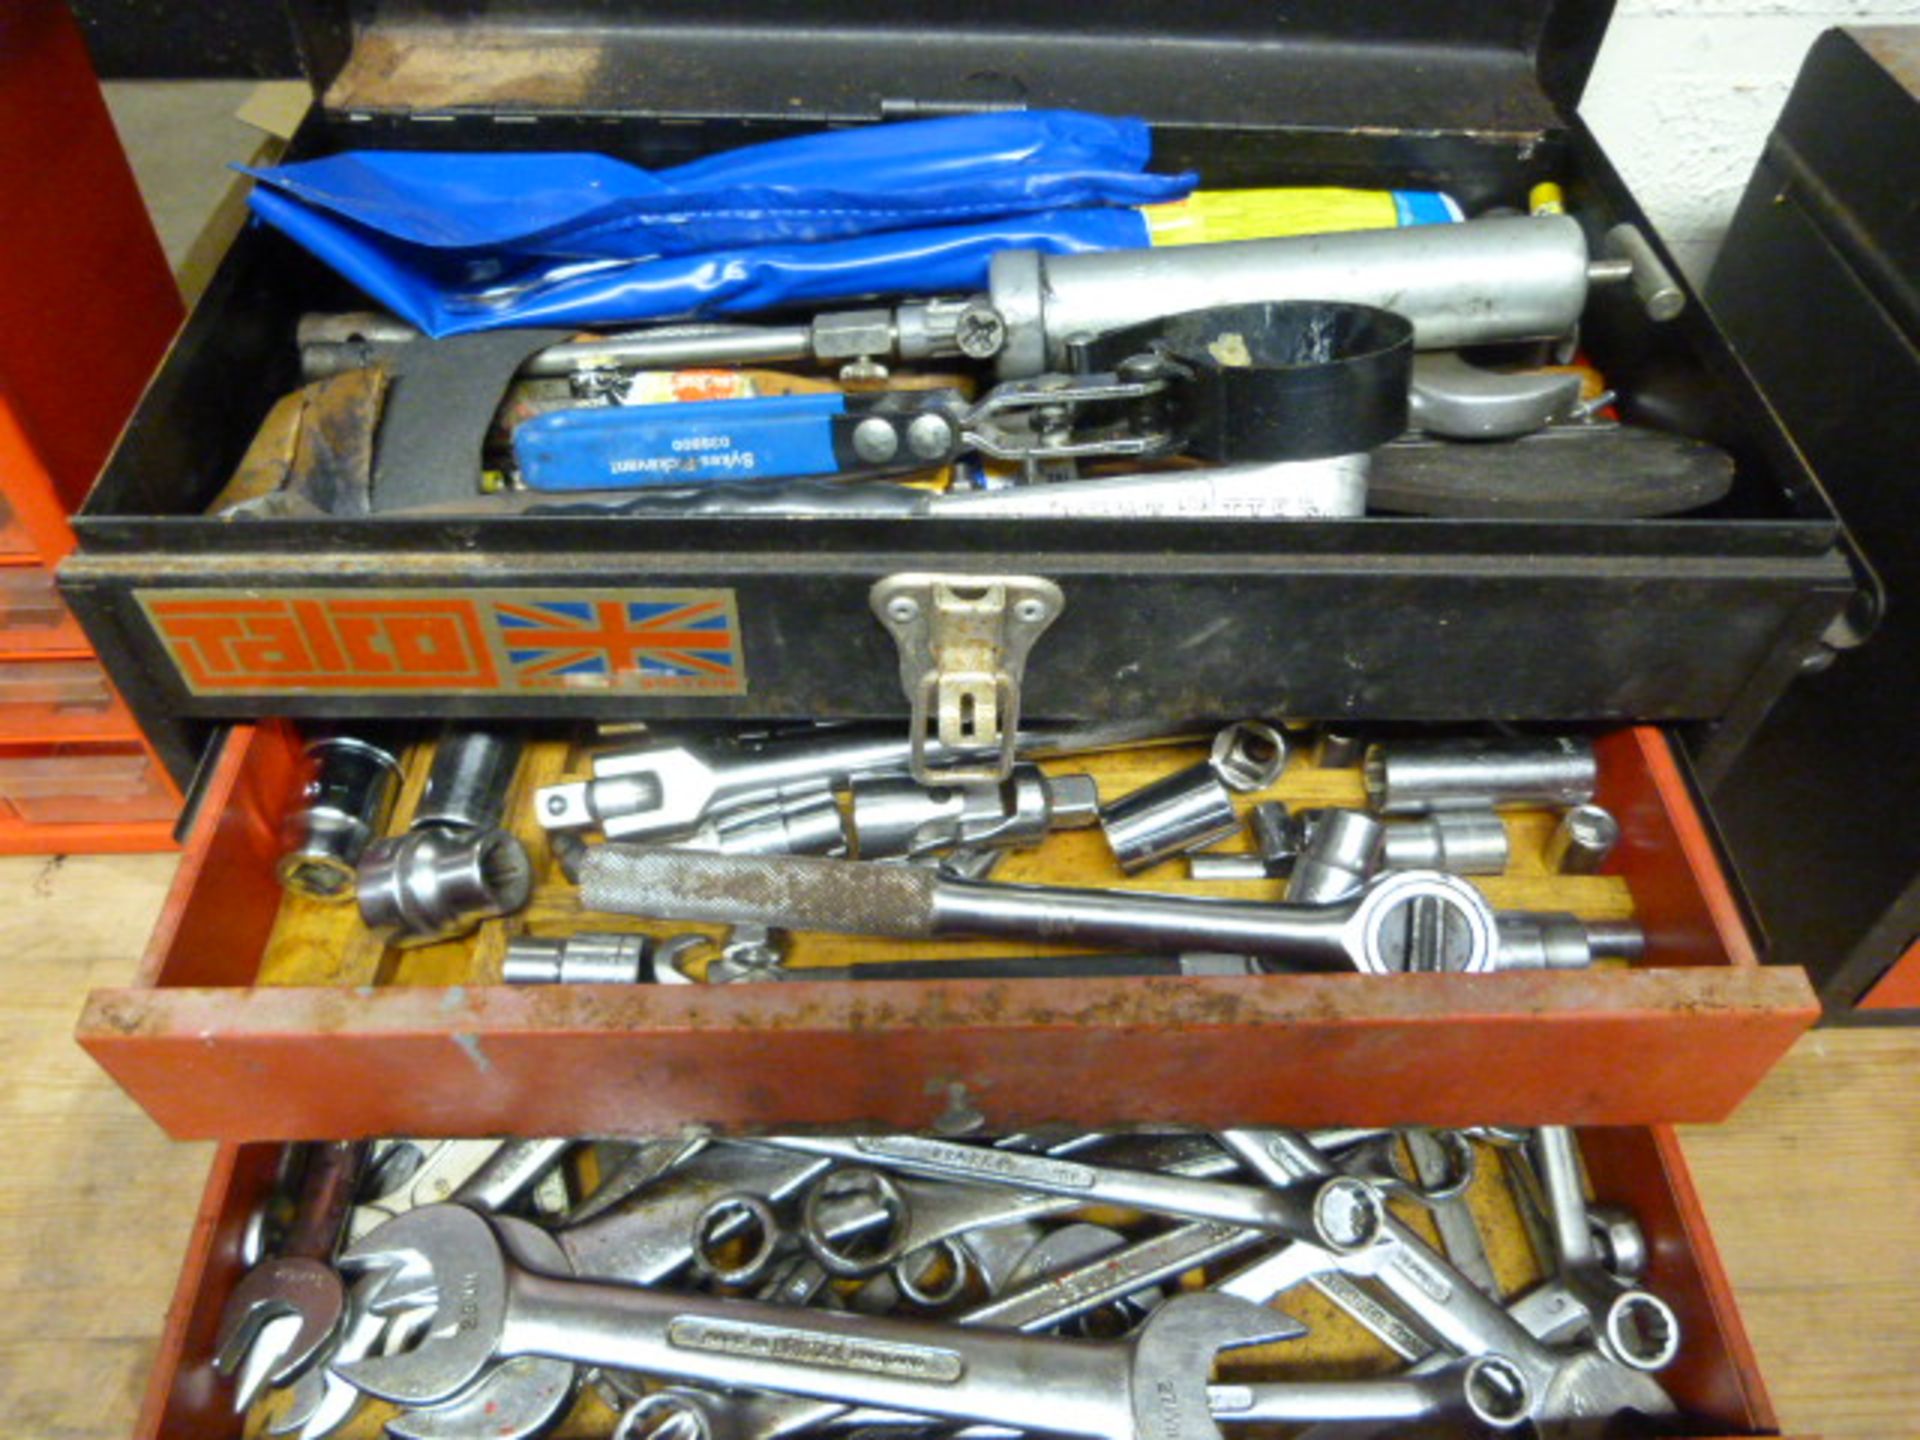 Toolbox with Contents Including Spanners, Ratchets